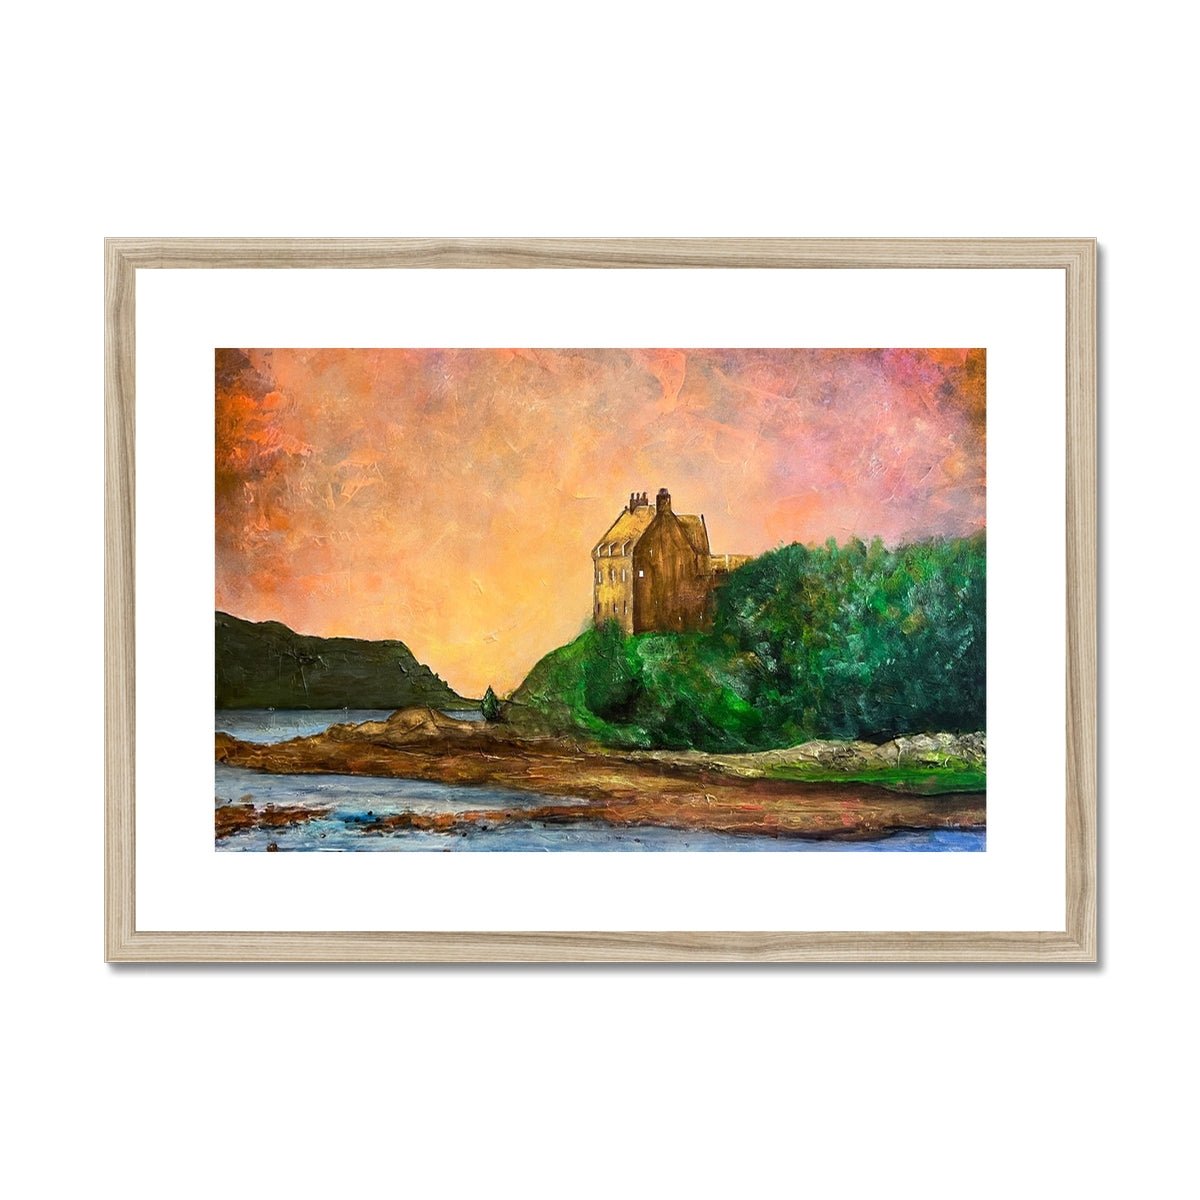 Duntrune Castle Painting | Framed & Mounted Prints From Scotland-Framed & Mounted Prints-Scottish Castles Art Gallery-A2 Landscape-Natural Frame-Paintings, Prints, Homeware, Art Gifts From Scotland By Scottish Artist Kevin Hunter